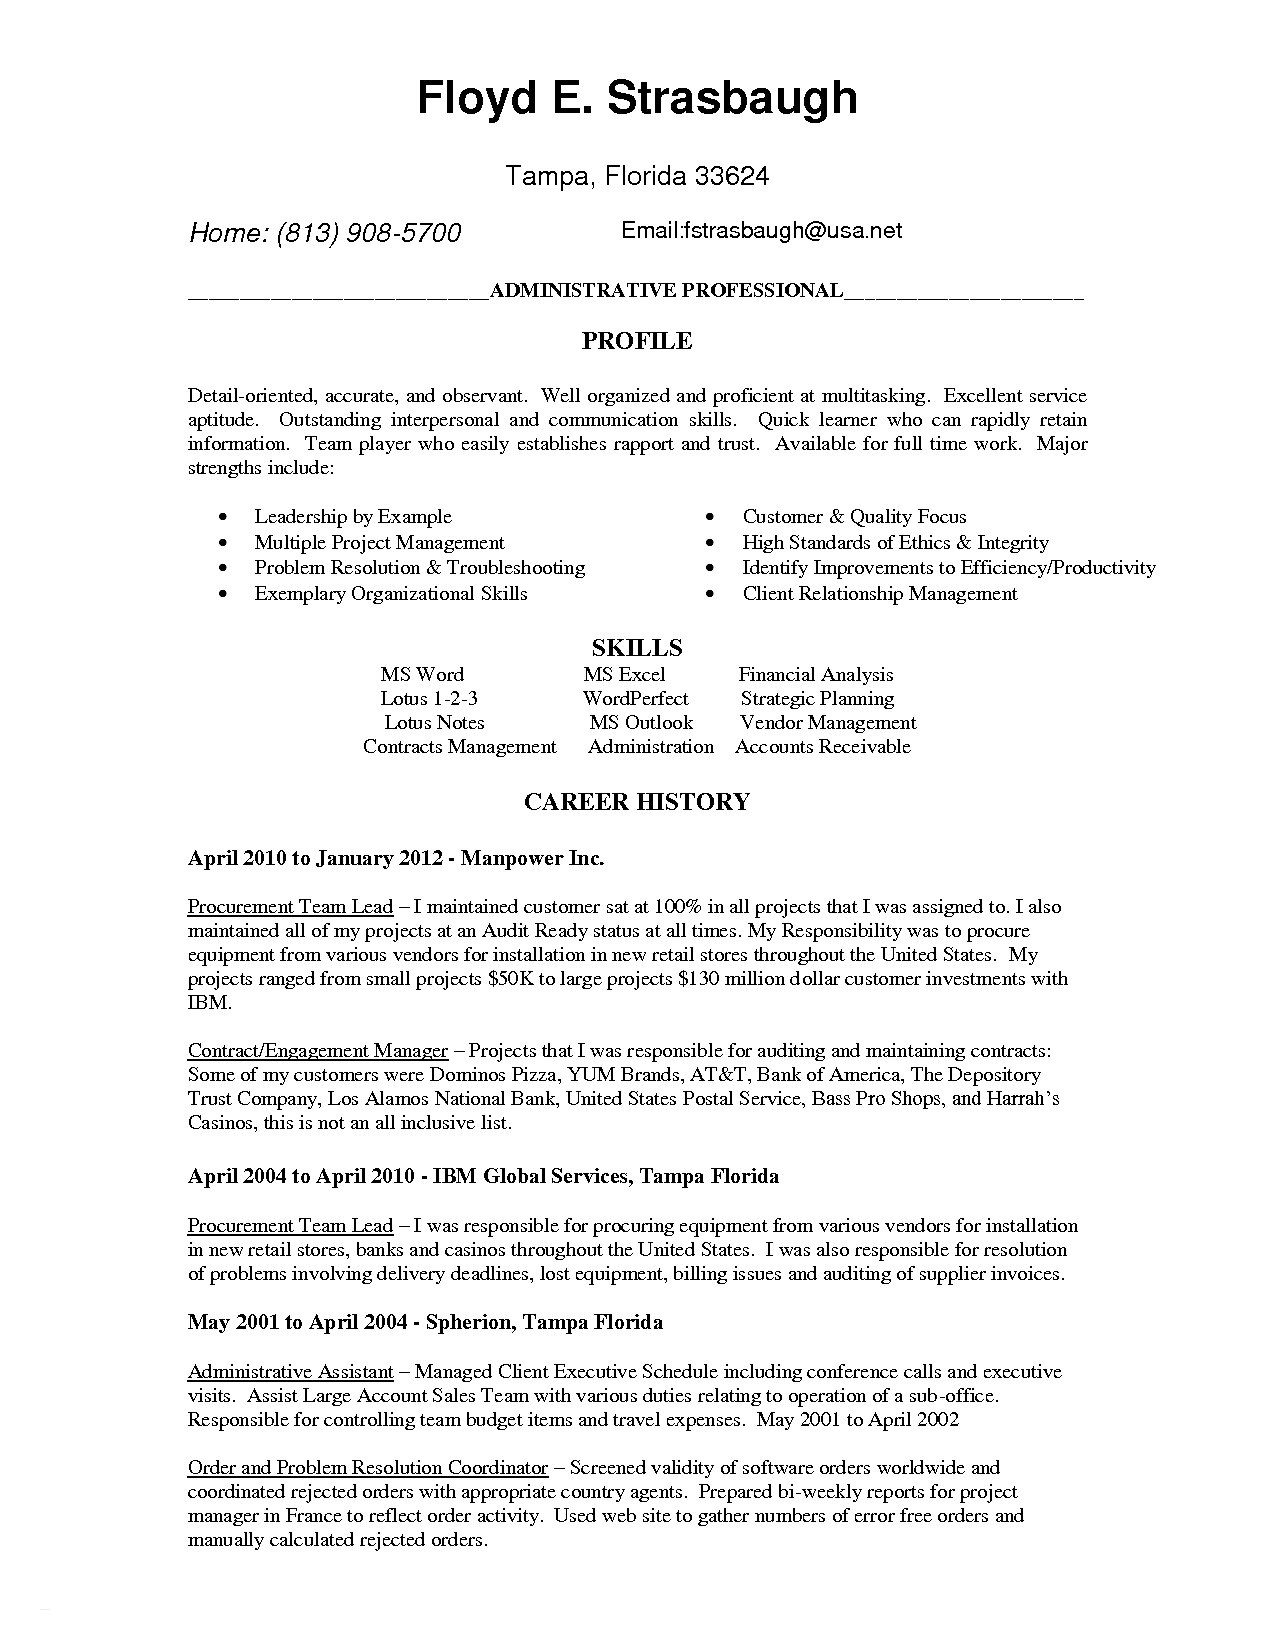 Download Letter Template - Resume and Cover Letter Templates Free Download Professional Resume